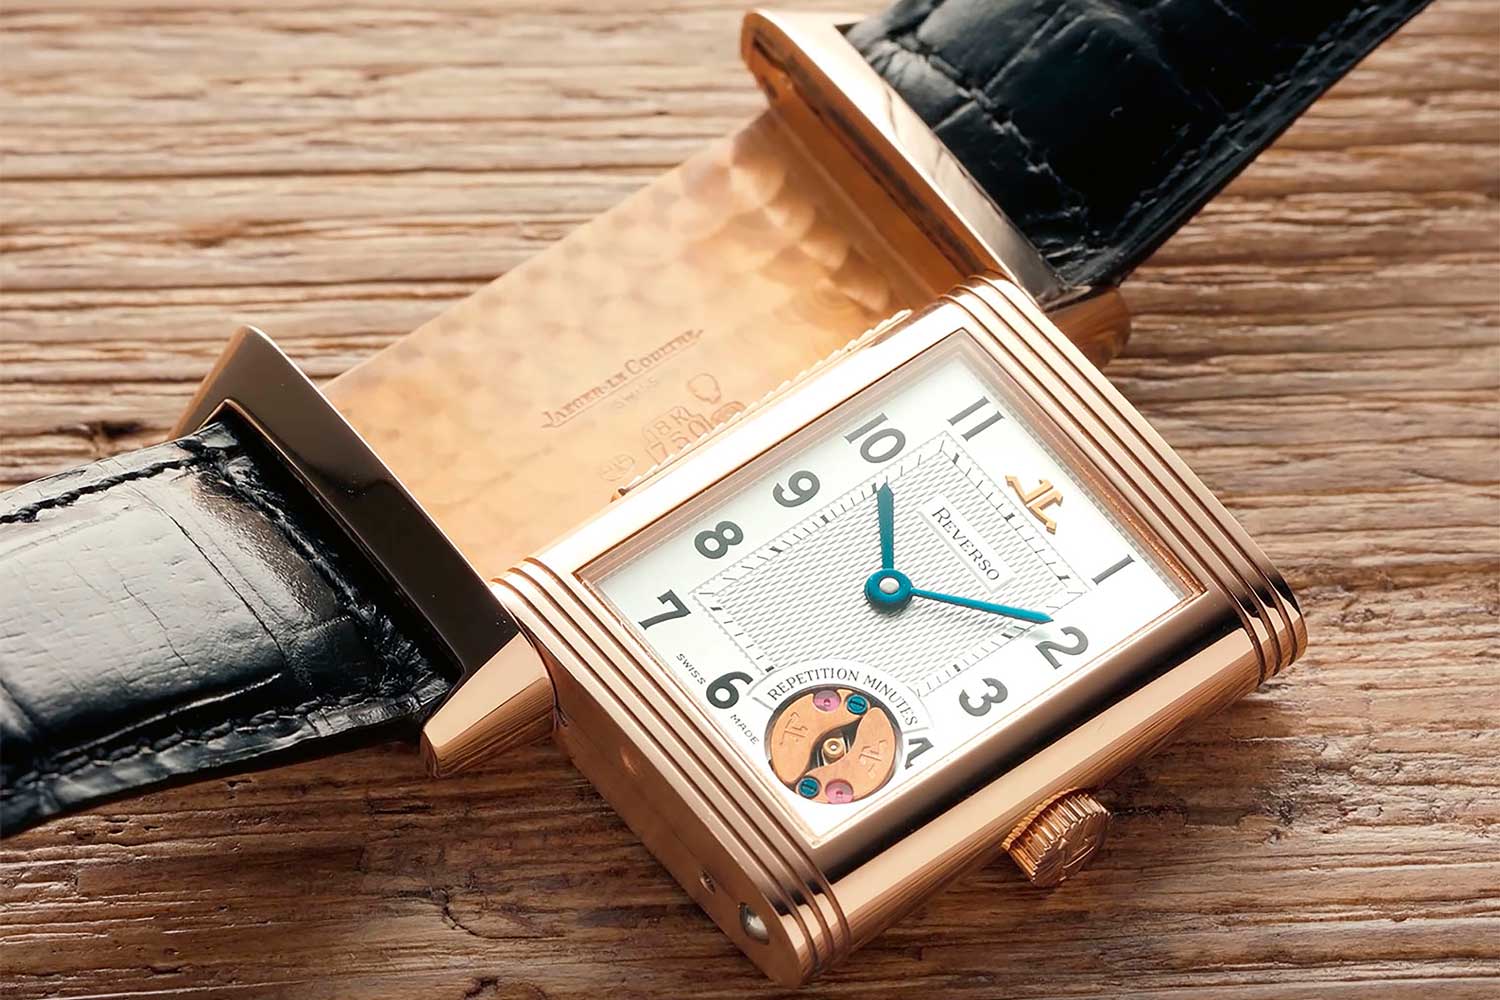 It should be impossible to squeeze a minute repeater into a Reverso, but that didn’t stop Jaeger-LeCoultre